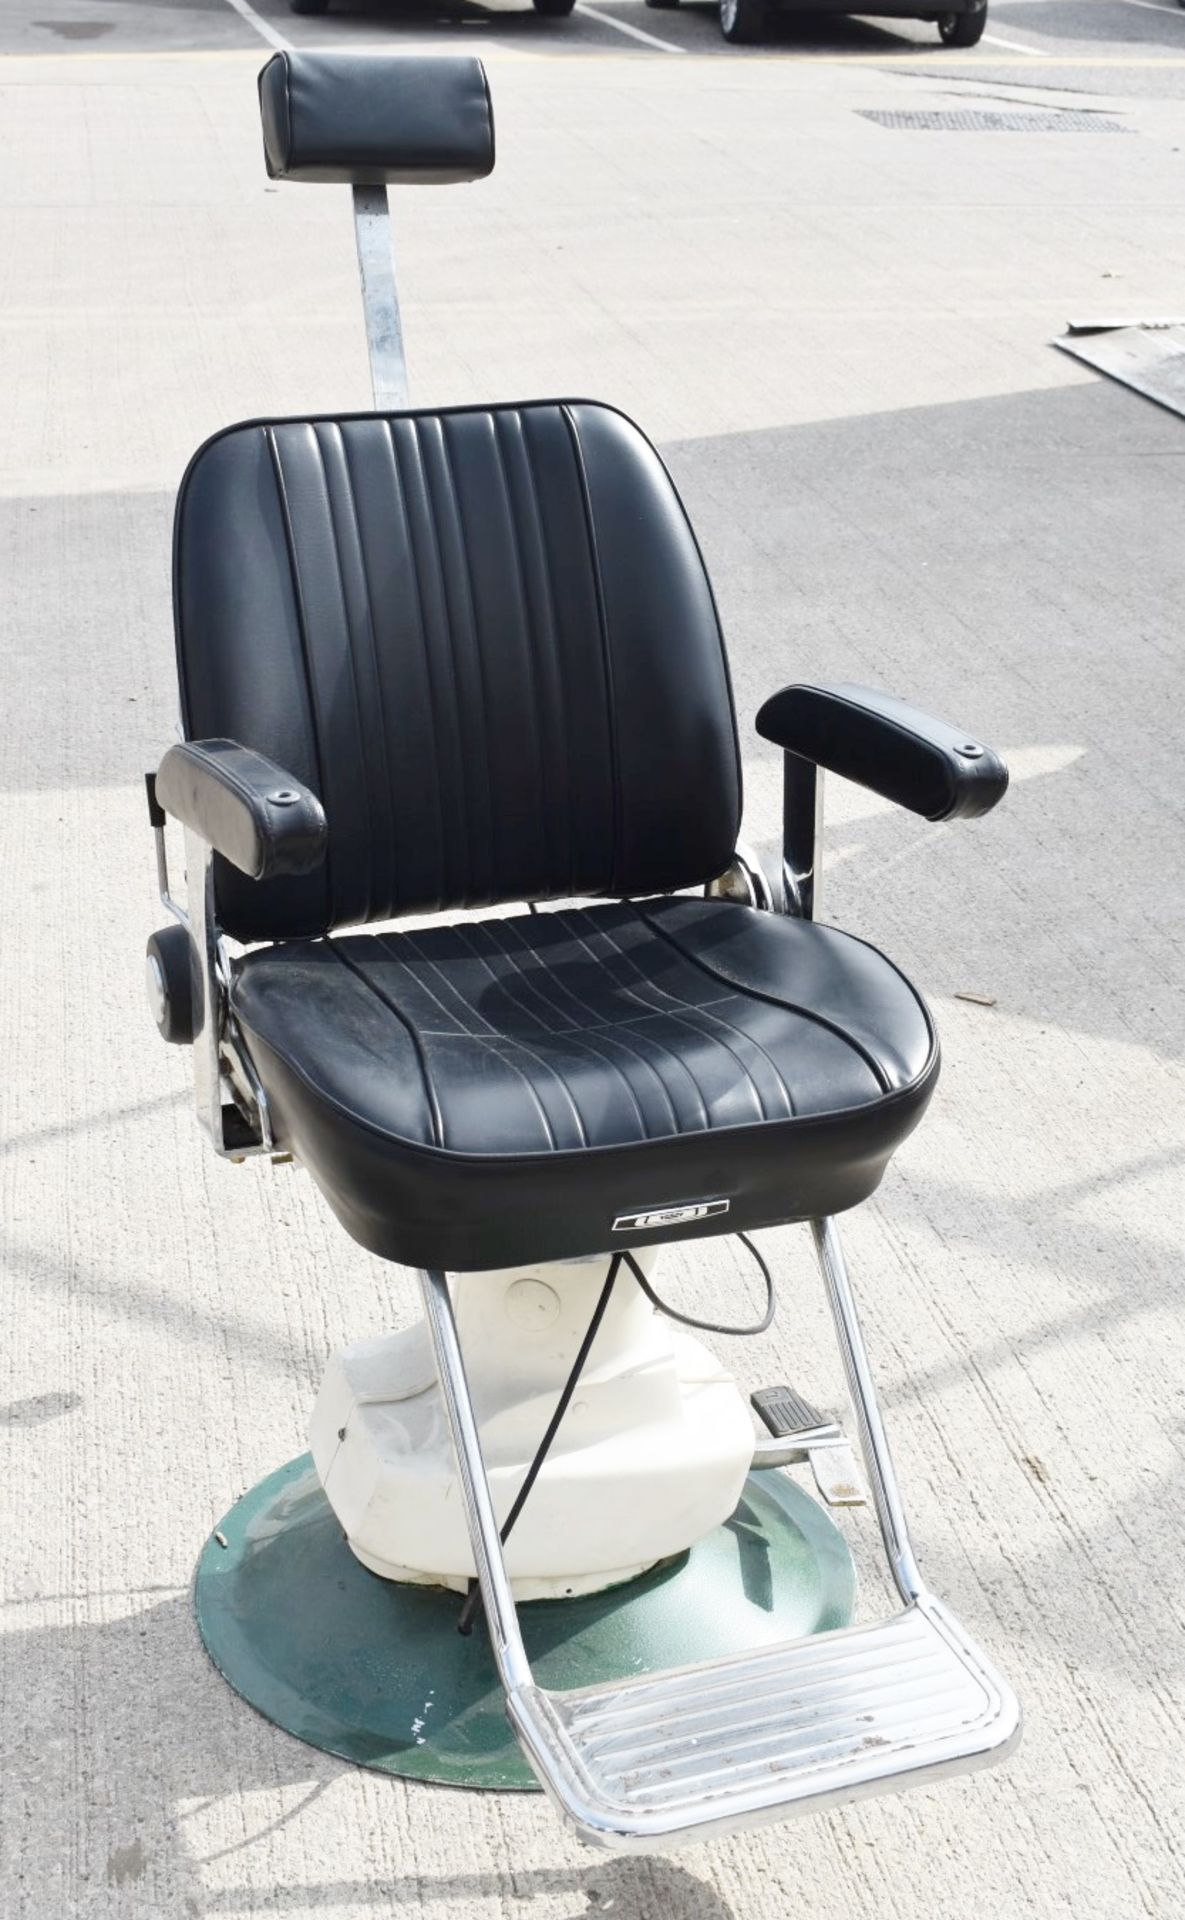 1 x Vintage BELMONT Electric Examination Power Chair With Head and Foot Rests - Removed From a